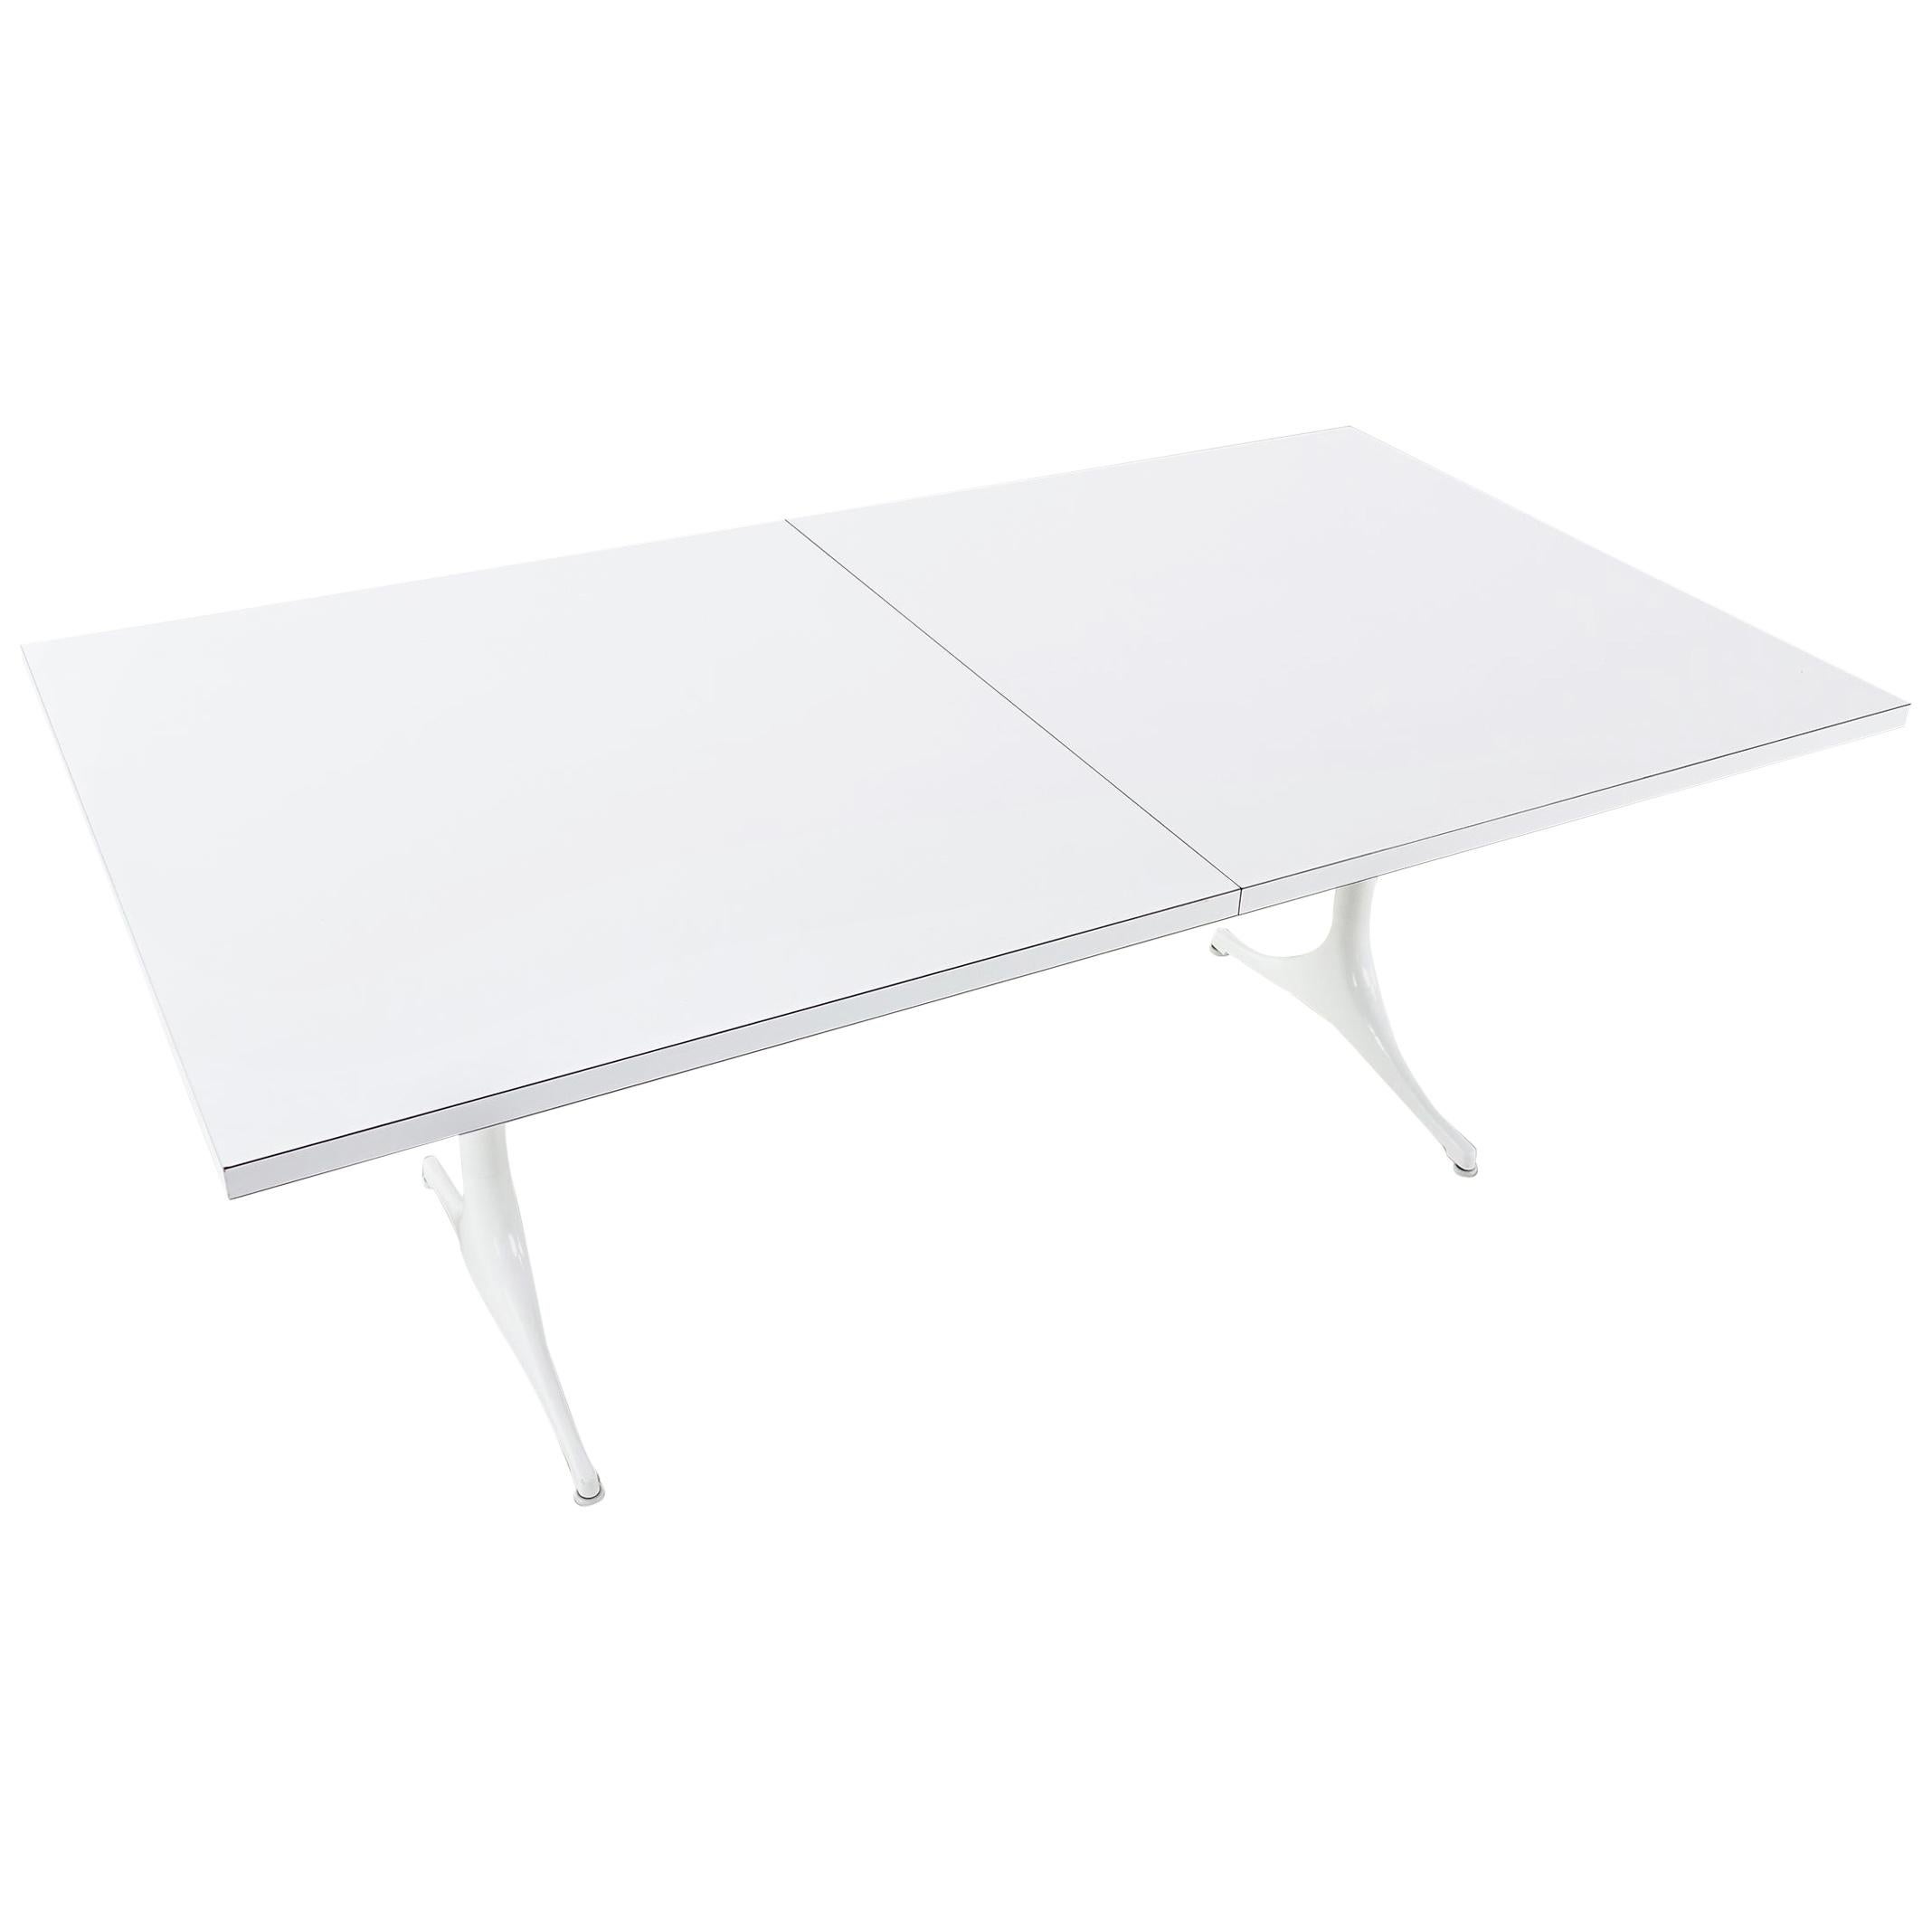 George Nelson Extendable American Dining Table for Herman Miller